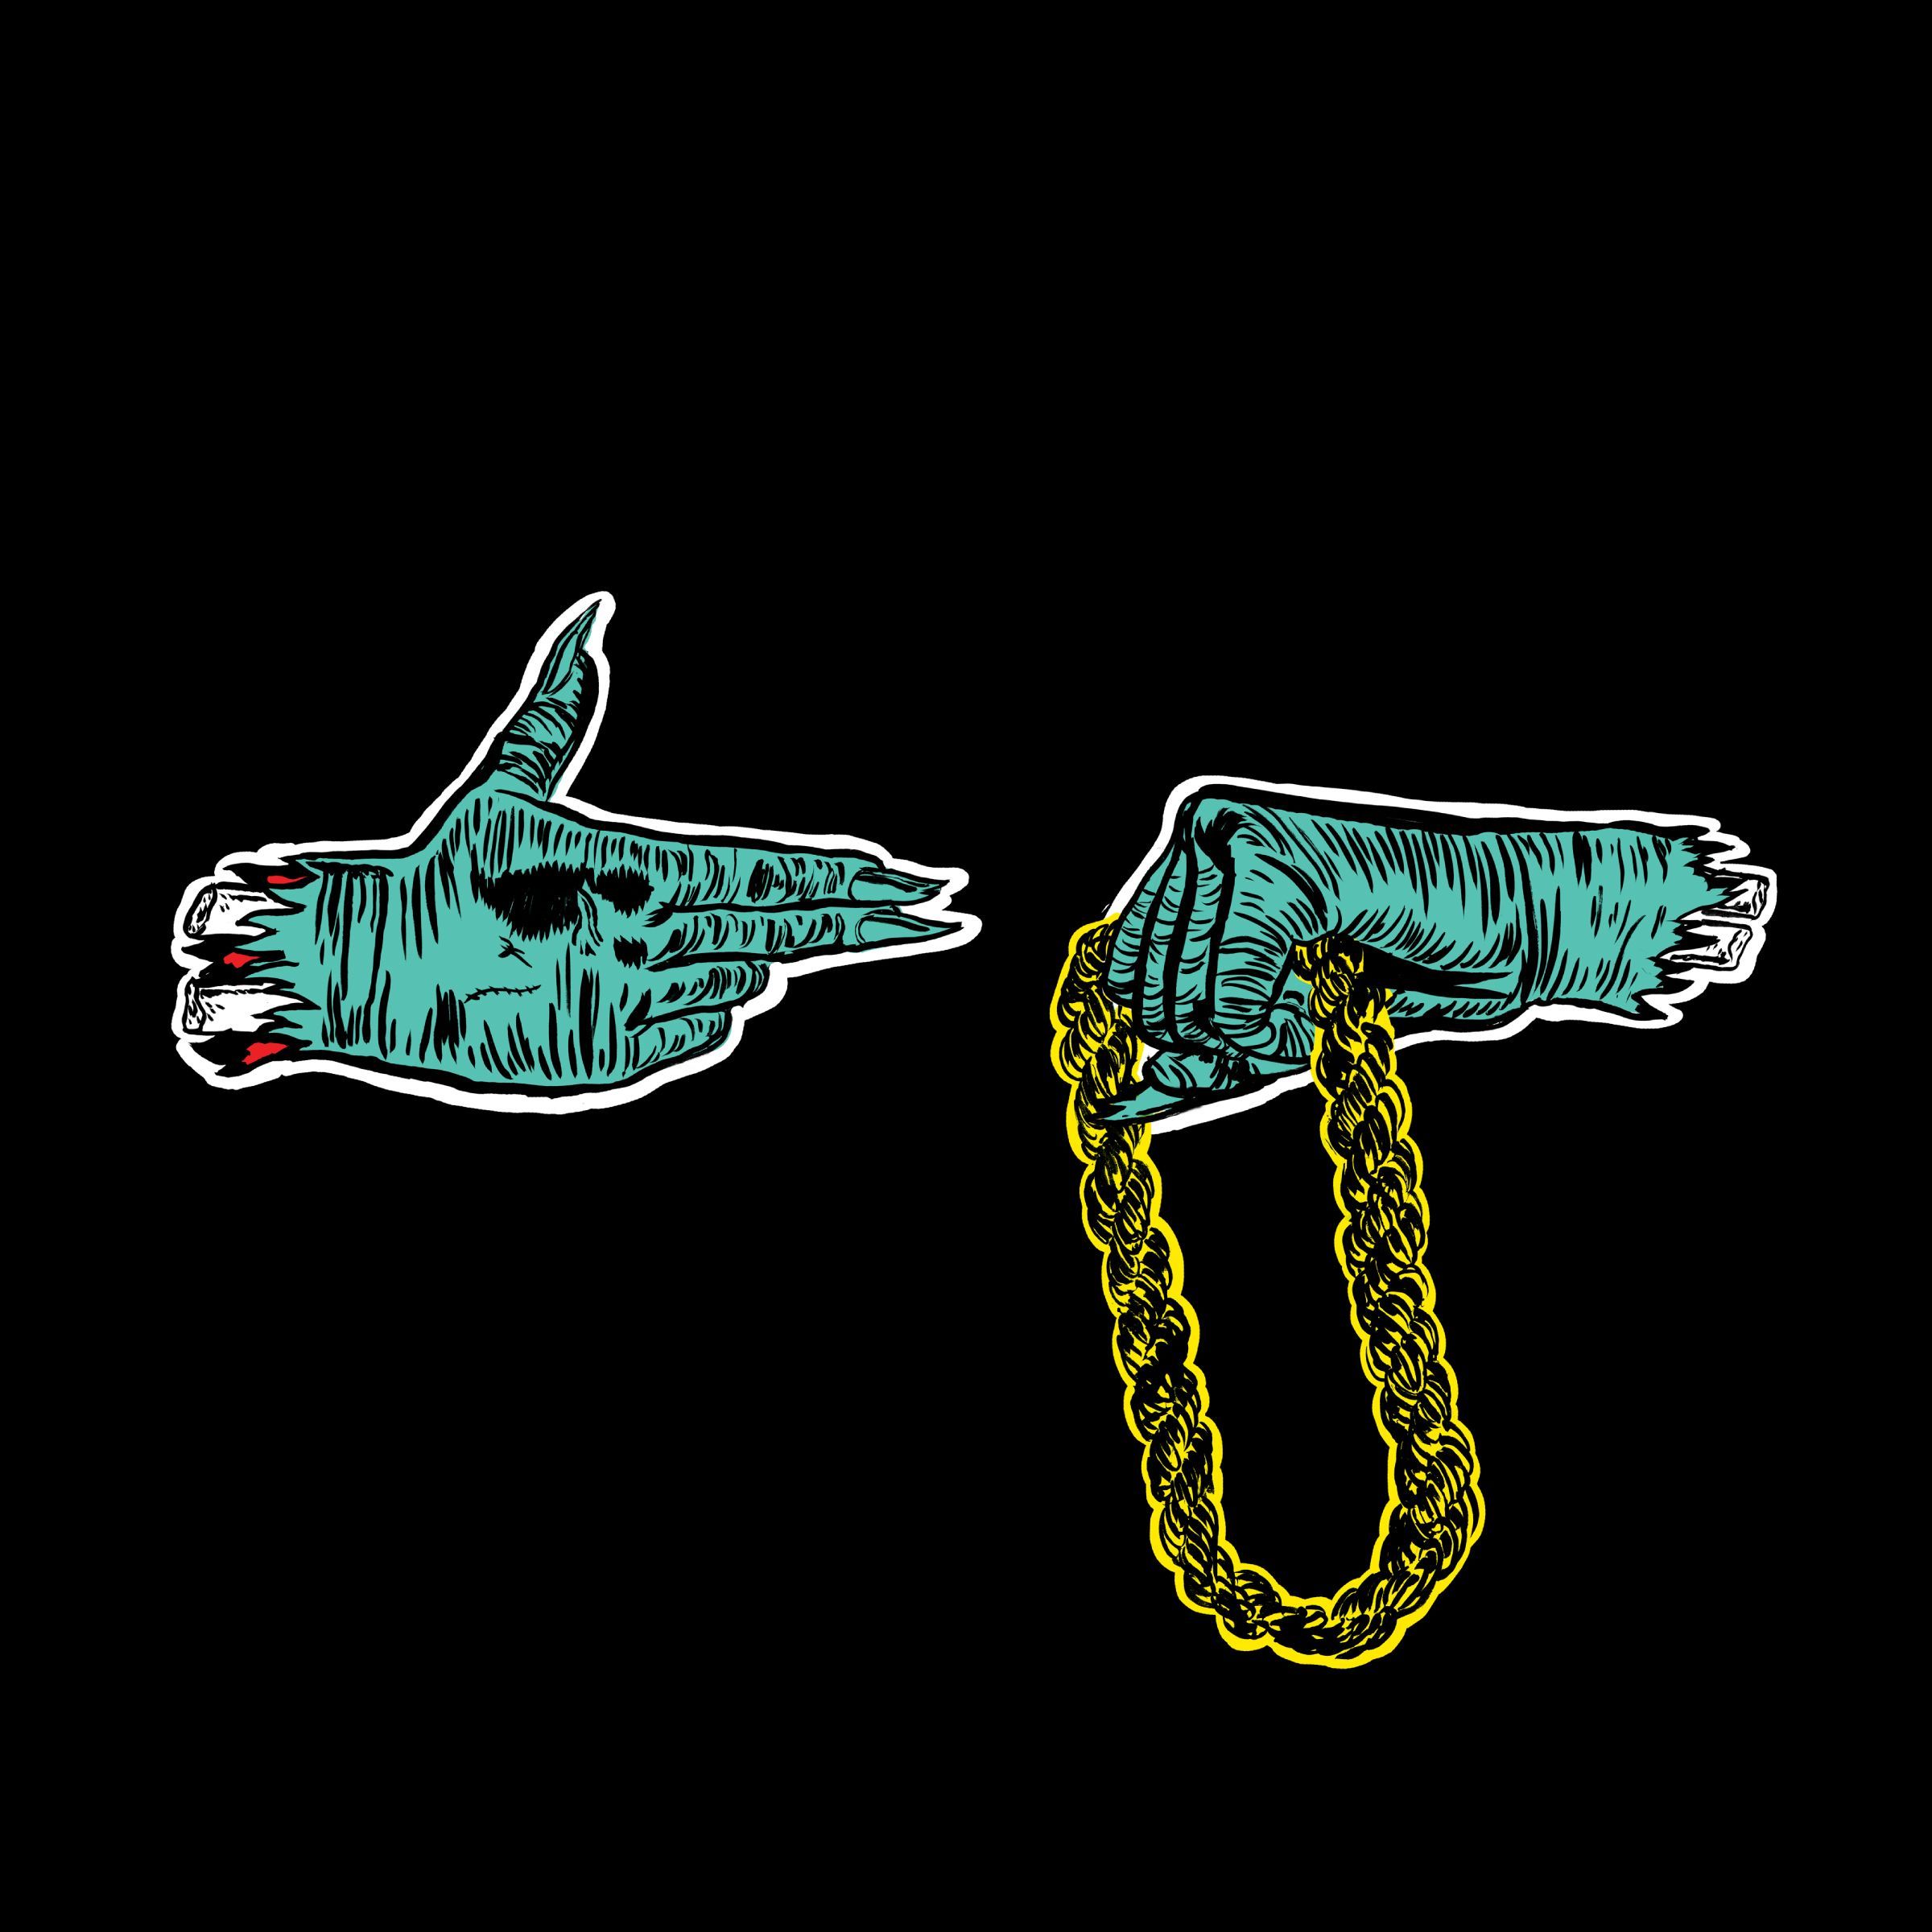 Run the Jewels. Run the jewels, Album covers, Hip hop albums